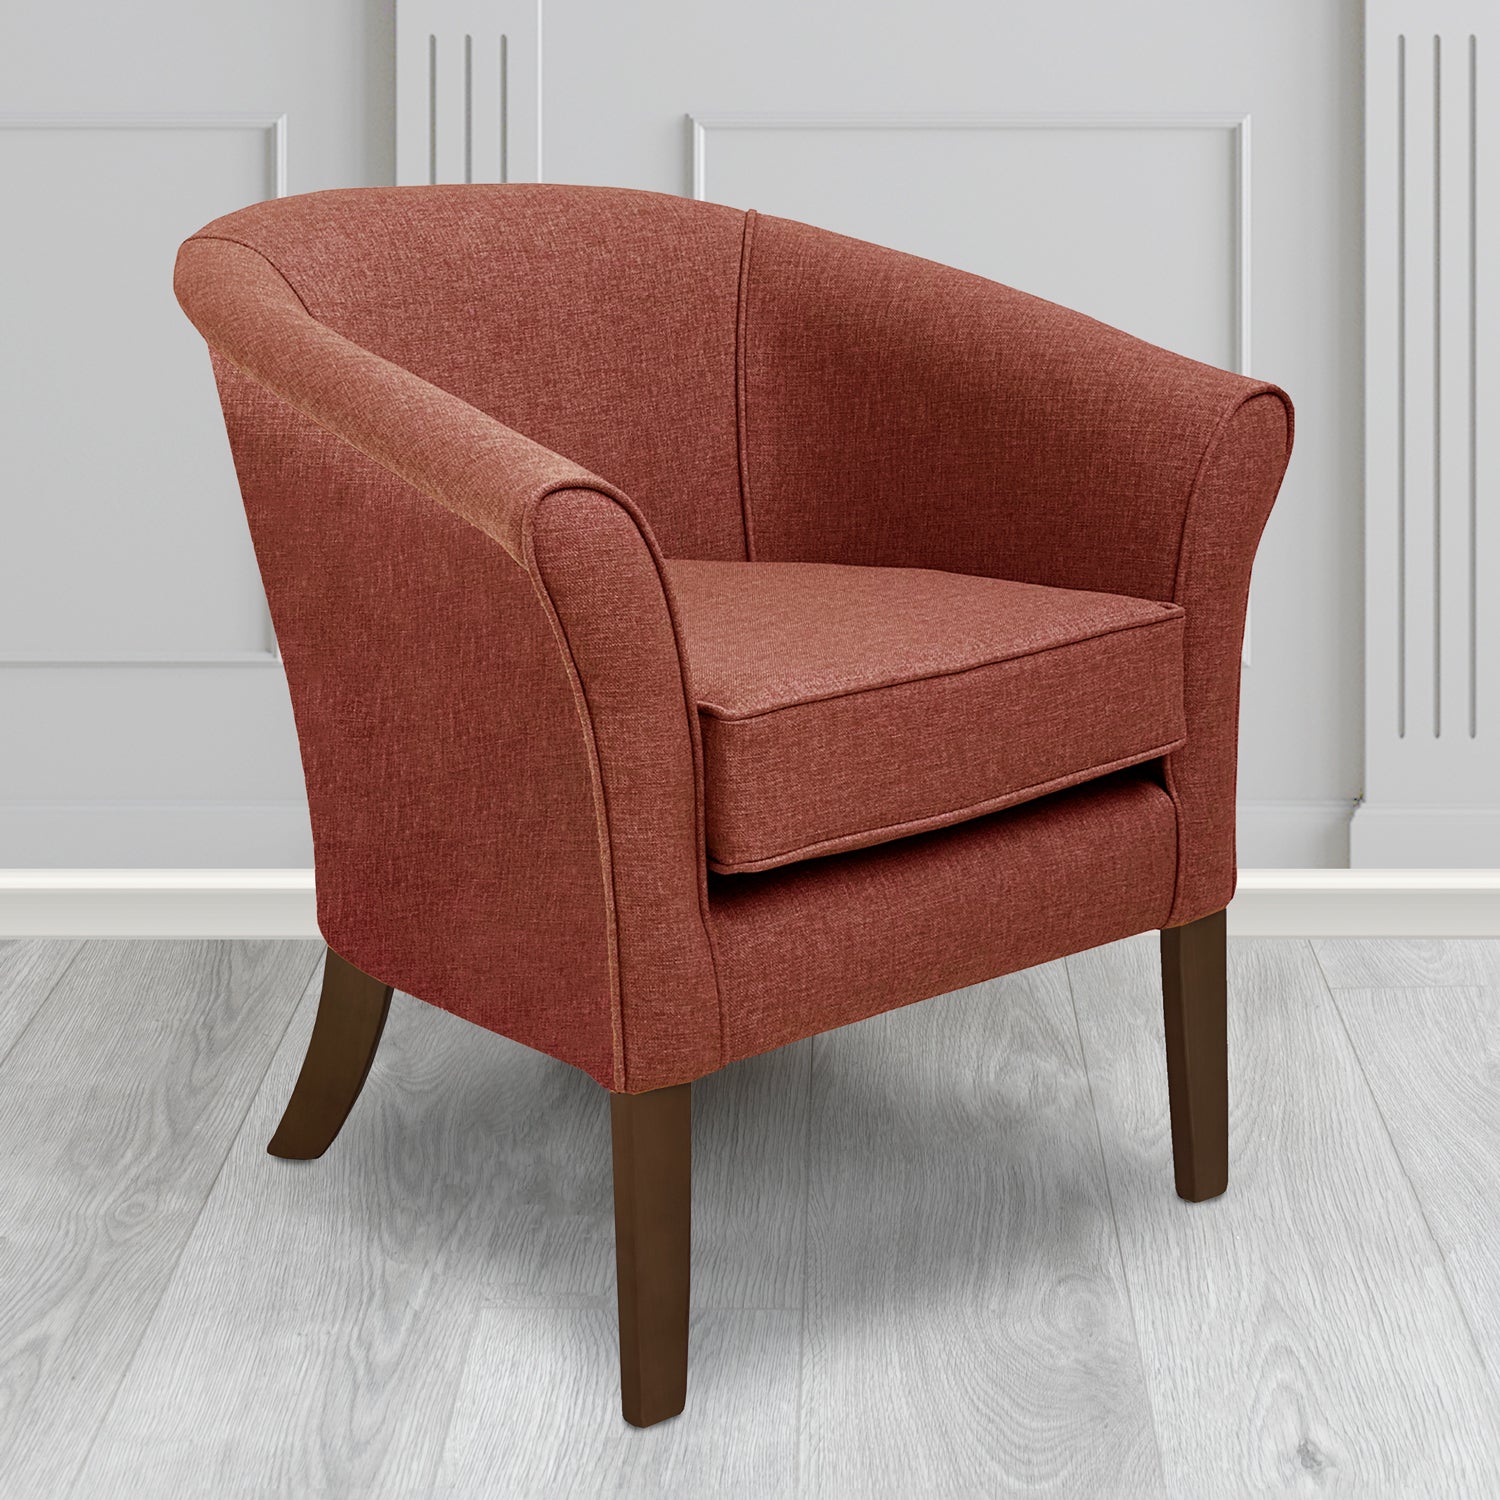 Aspen Tub Chair in Marna 408 Terracotta Crib 5 Fabric - Antimicrobial, Stain Resistant & Waterproof - The Tub Chair Shop